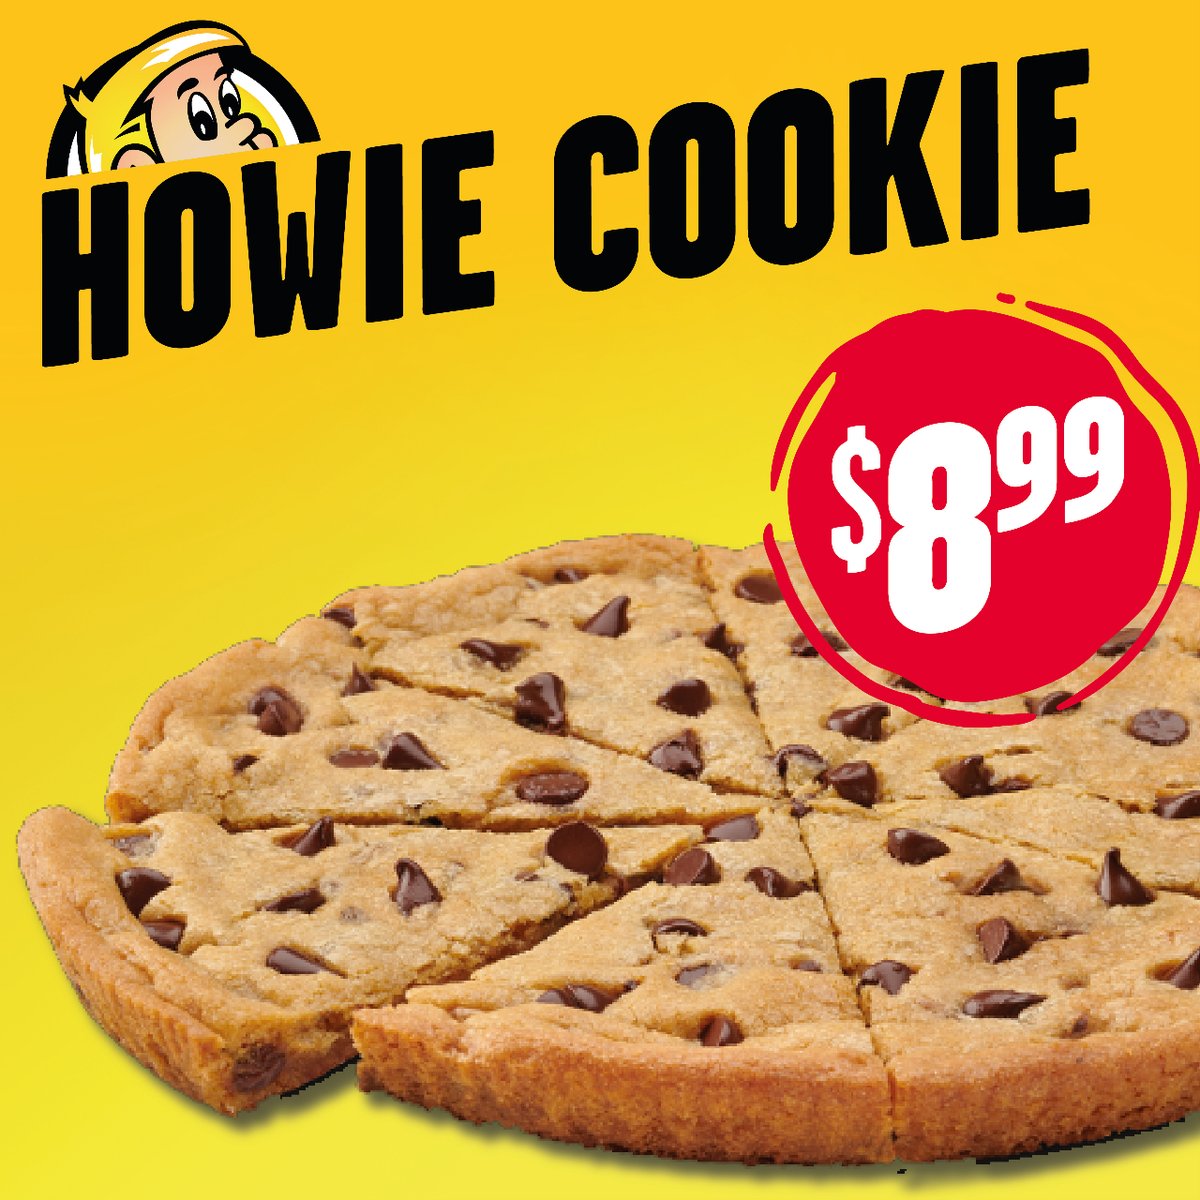 Treat yourself to a warm and gooey Howie Cookie. Baked to perfection, it's a melt-in-your-mouth experience that will leave you wanting more. 🍪❤️ #CookieLove #GooeyGoodness